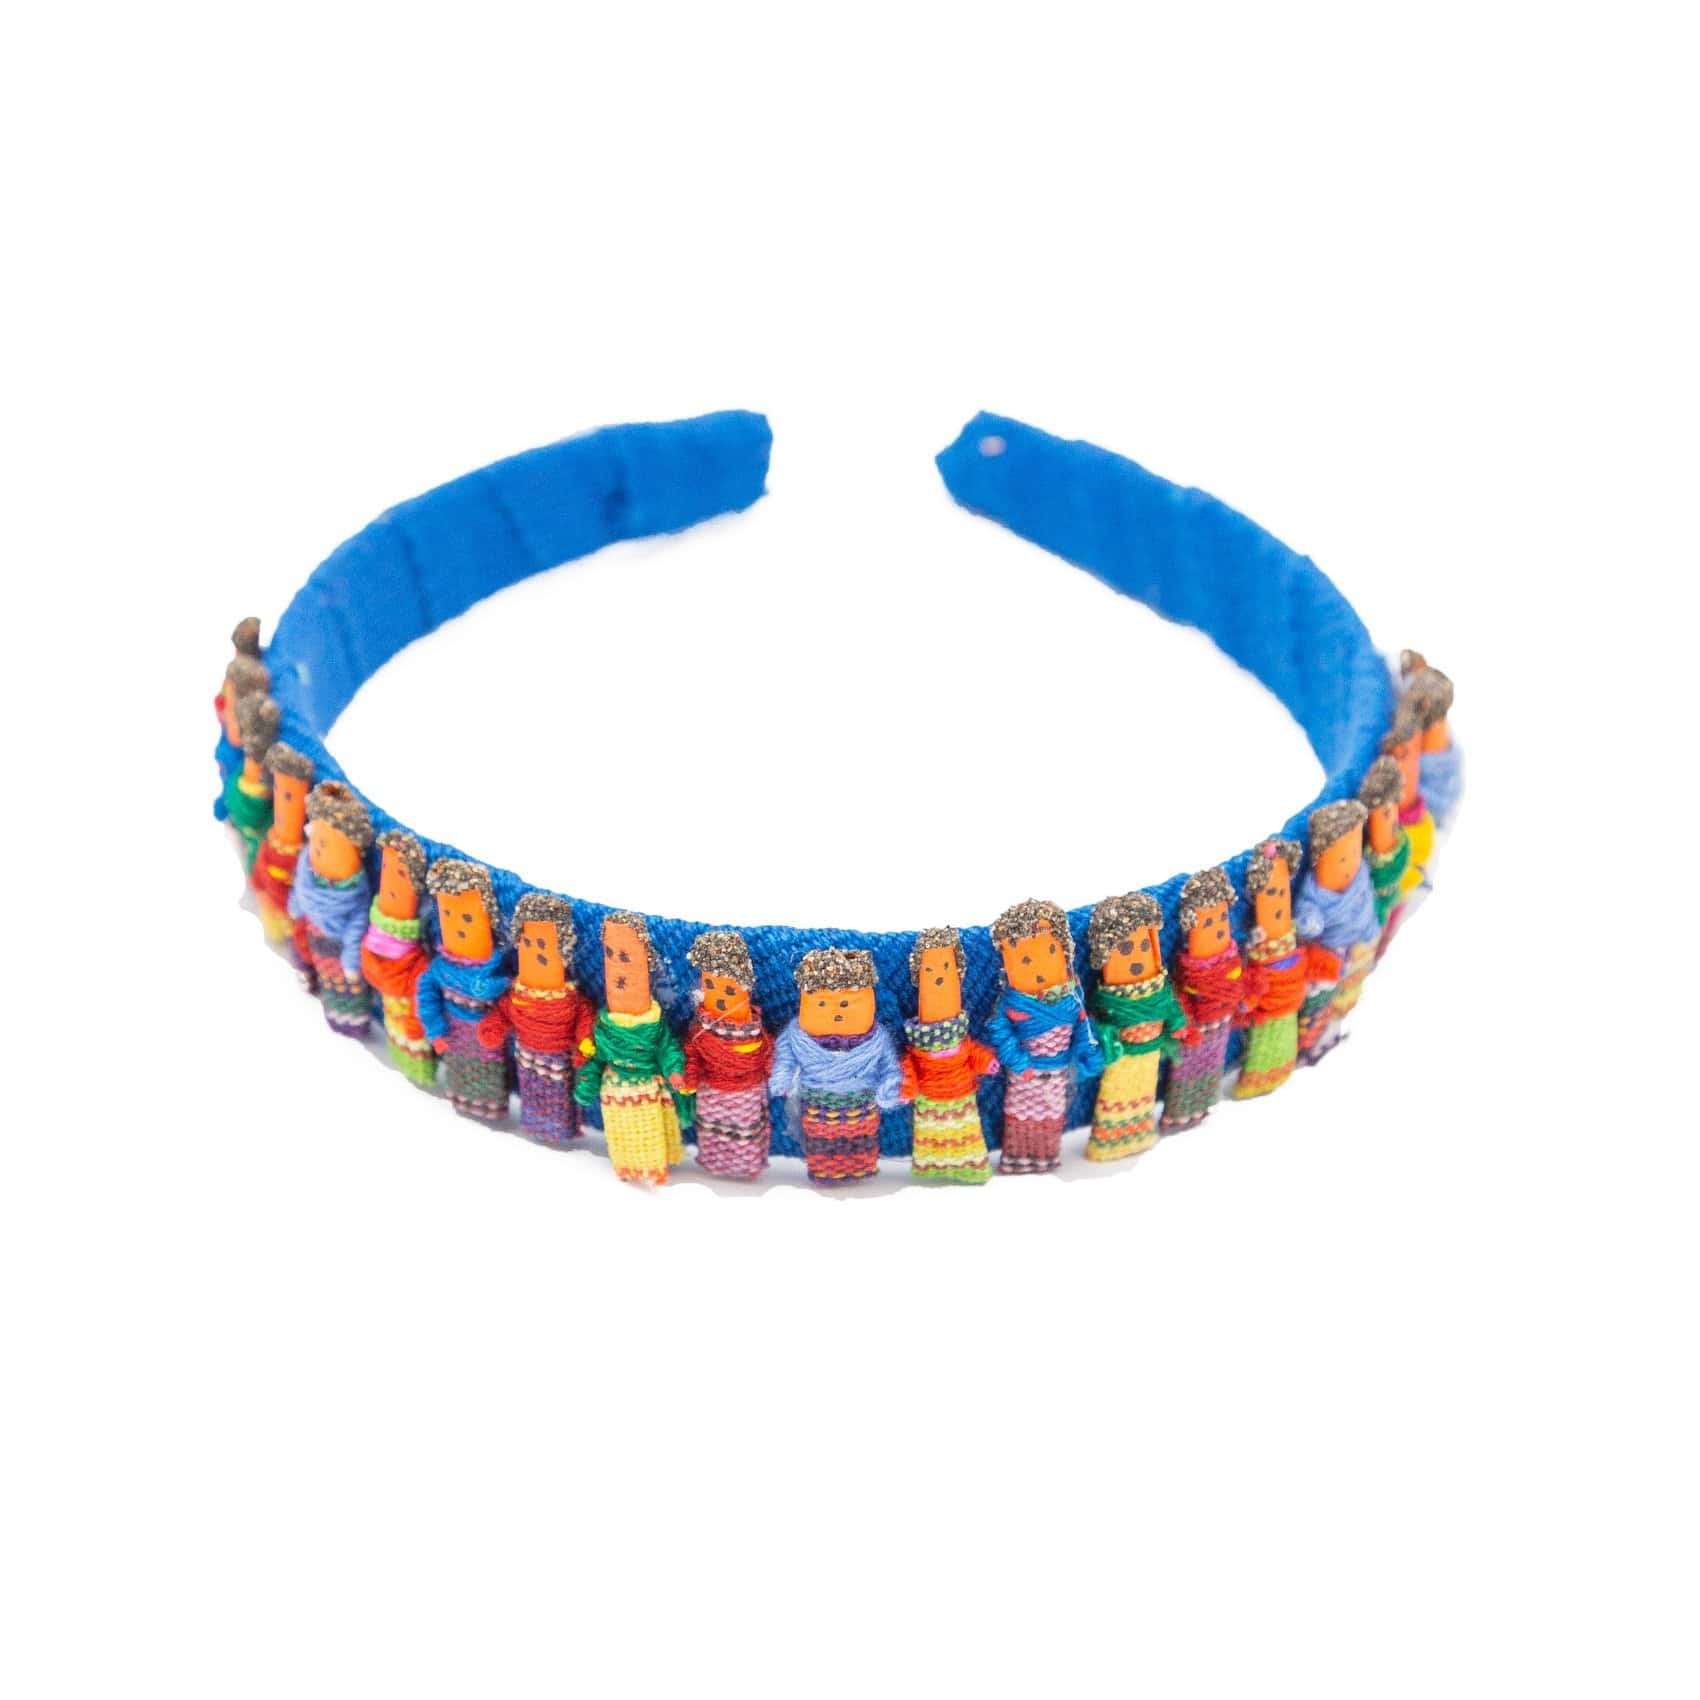 A unique take on our best-selling worry dolls, these headbands are handcrafted with care and lined with almost 24 traditional dolls!  Each doll's face is hand-painted, so every item is one-of-a-kind. In addition, the dolls are clothed in assorted colors and patterns and each headband is guaranteed to fit most adult heads. As always... Handmade and Fair Trade!